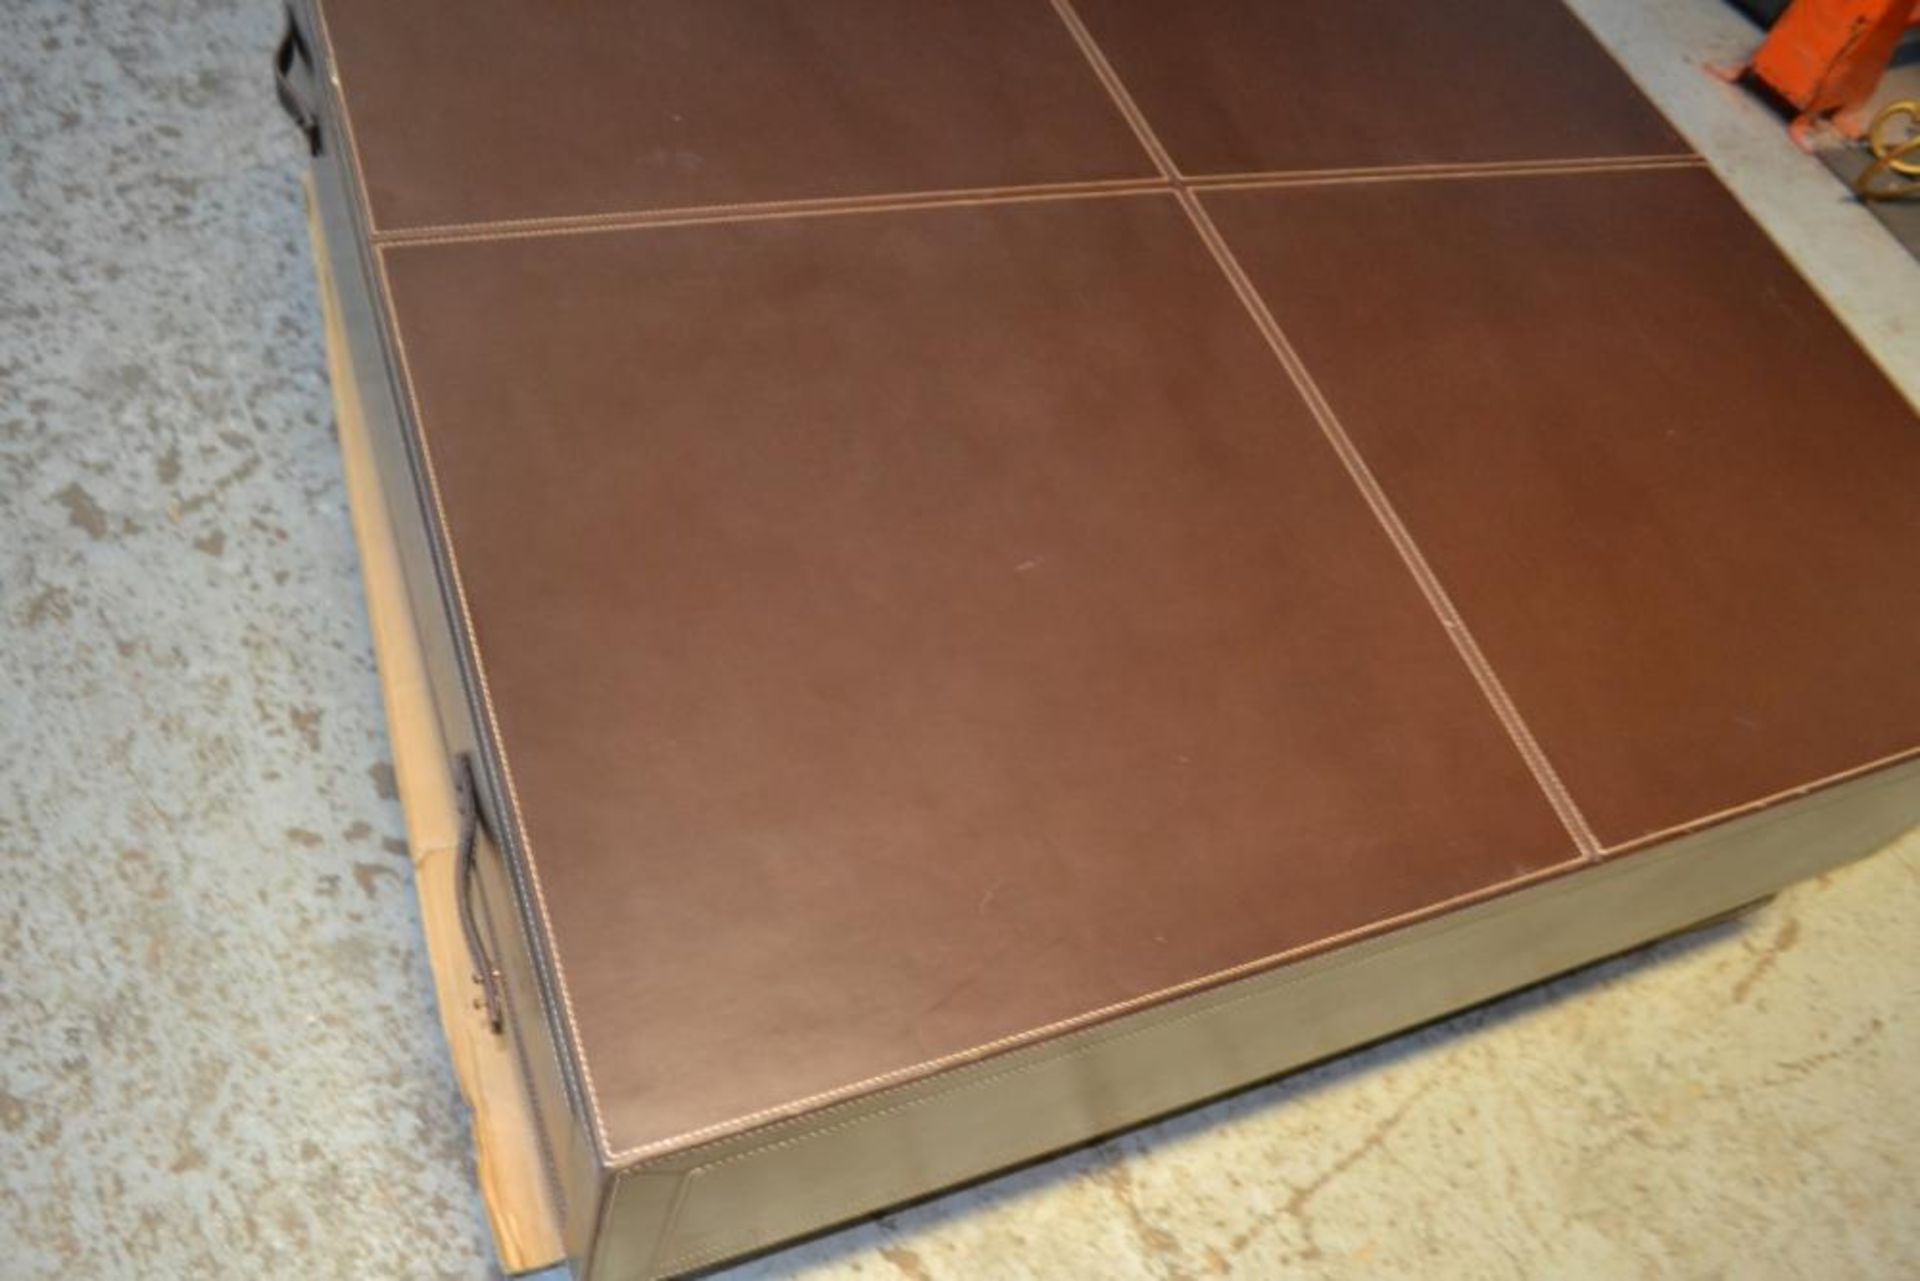 1 x Large Brown Leather Clad Coffee Table With 2-Drawer Storage - Dimensions: 120 x 120 x H31cm - - Image 3 of 11